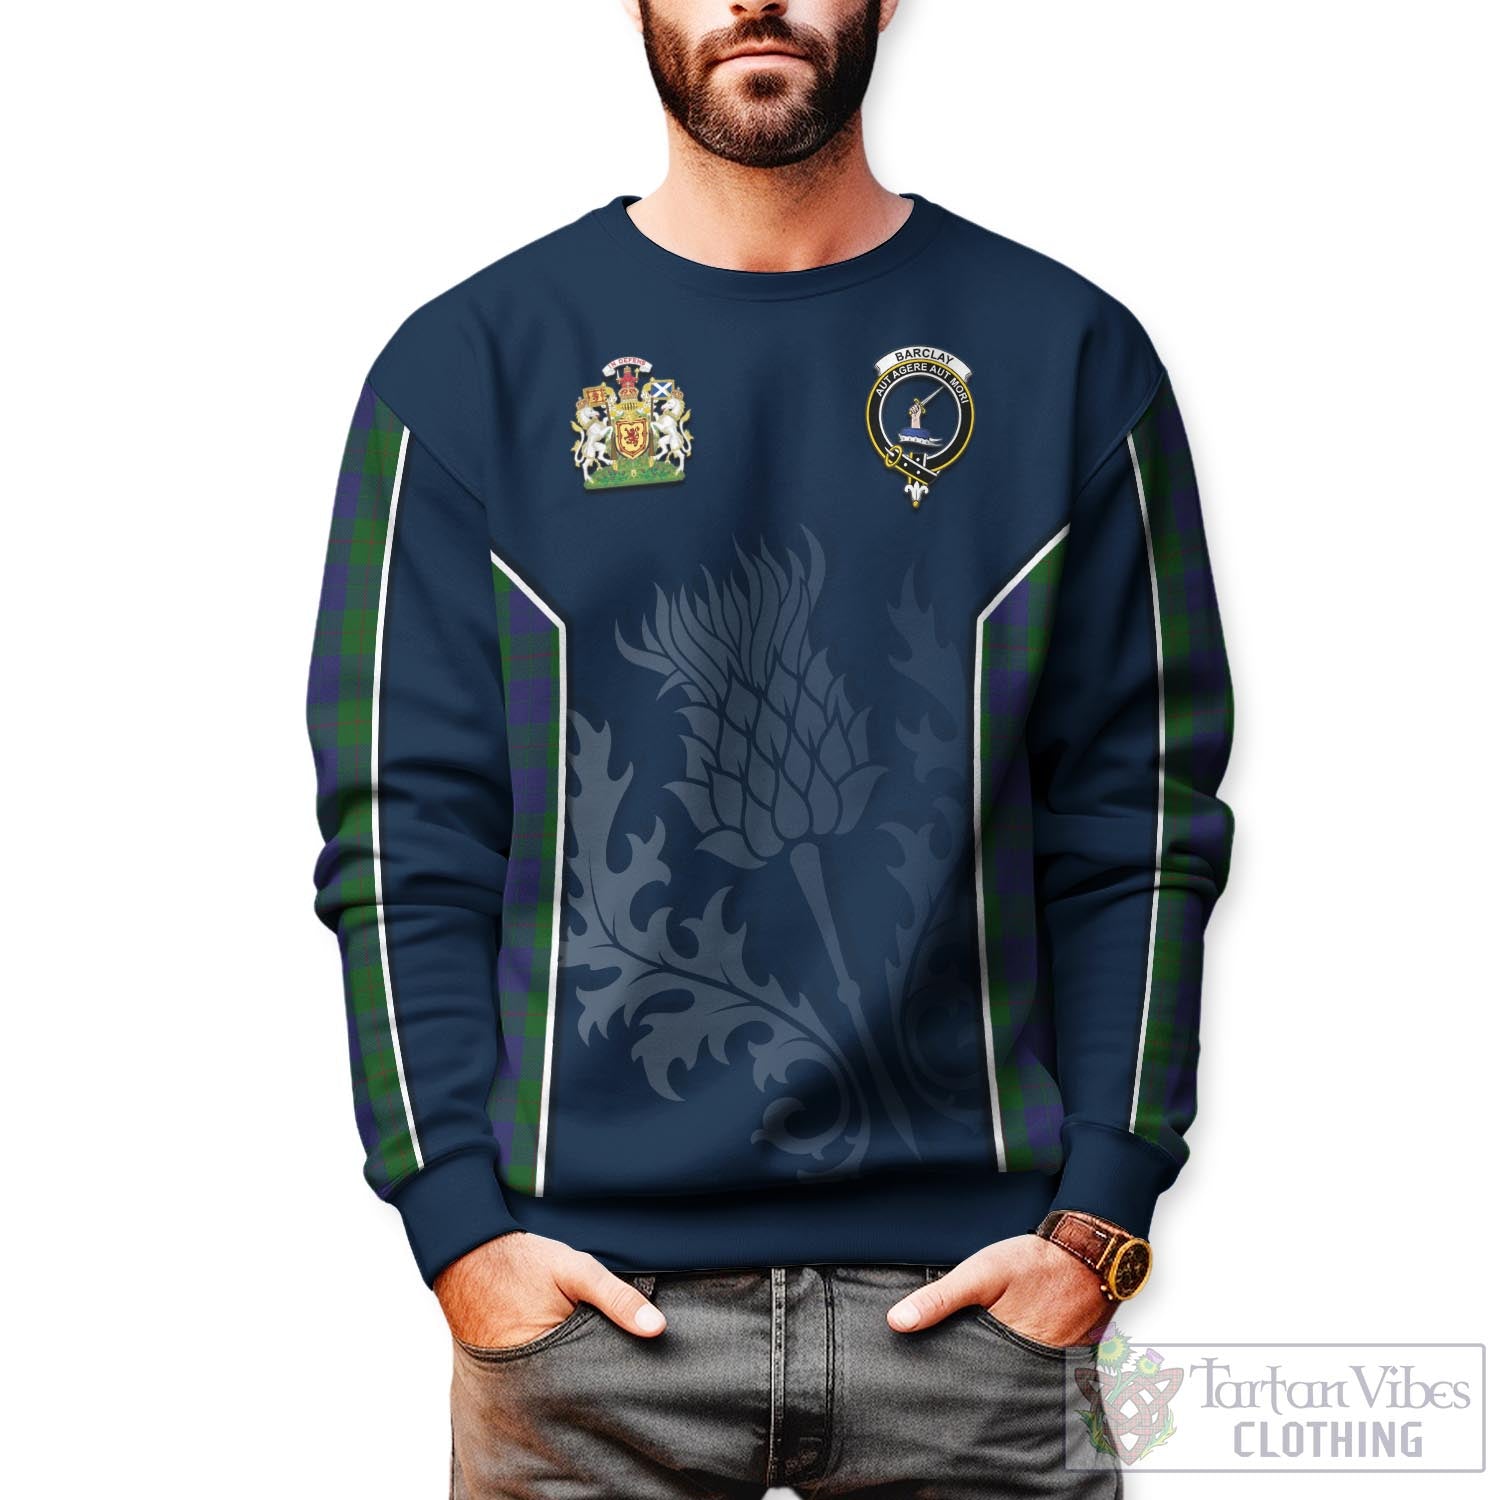 Tartan Vibes Clothing Barclay Tartan Sweatshirt with Family Crest and Scottish Thistle Vibes Sport Style